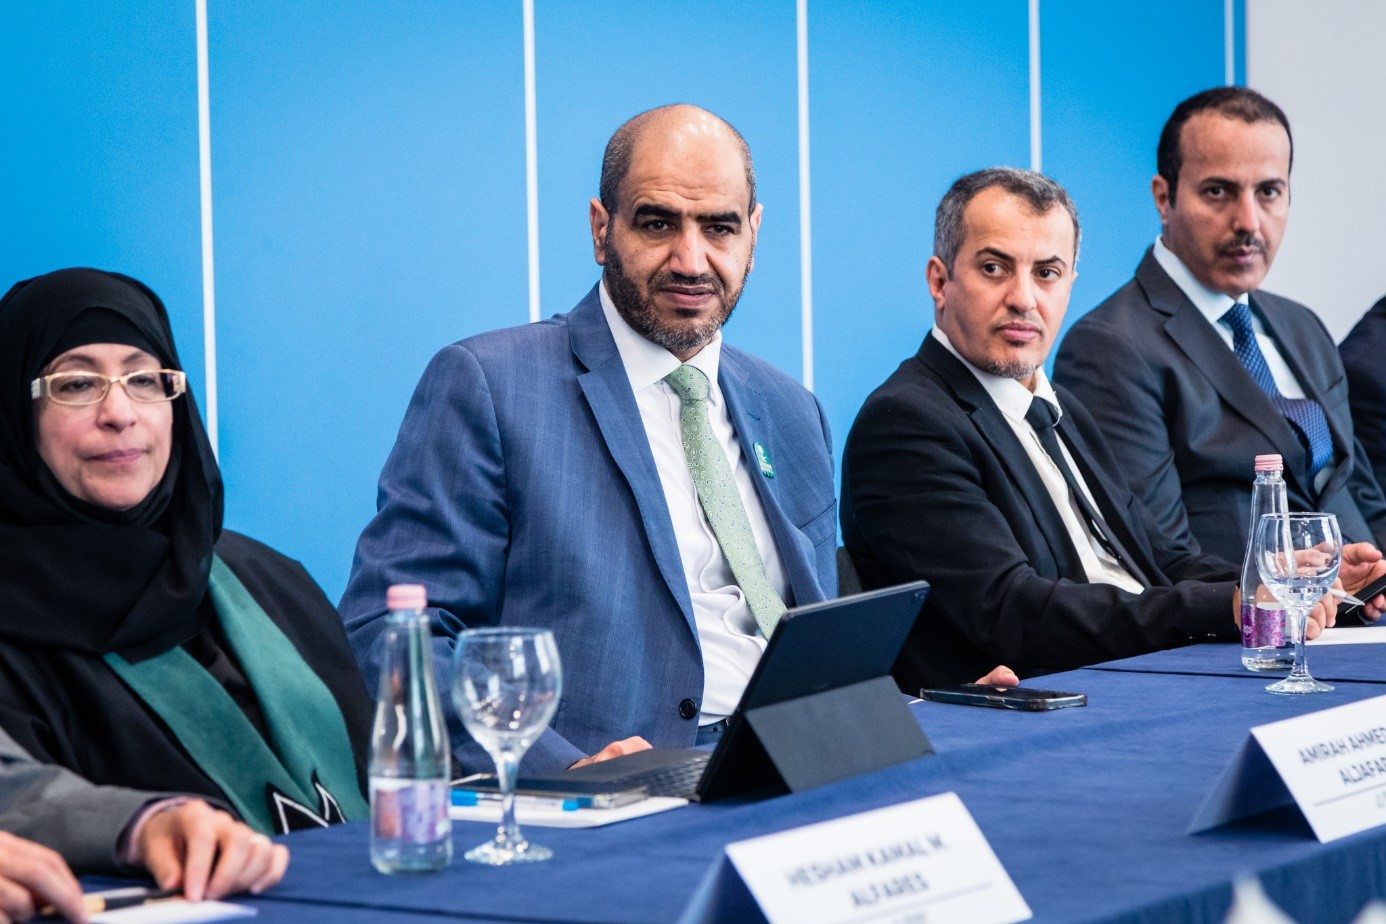 Ahmed Yahya A. Aldagreer (second from left), Deputy Ambassador of the Embassy of Saudi Arabia in Hungary